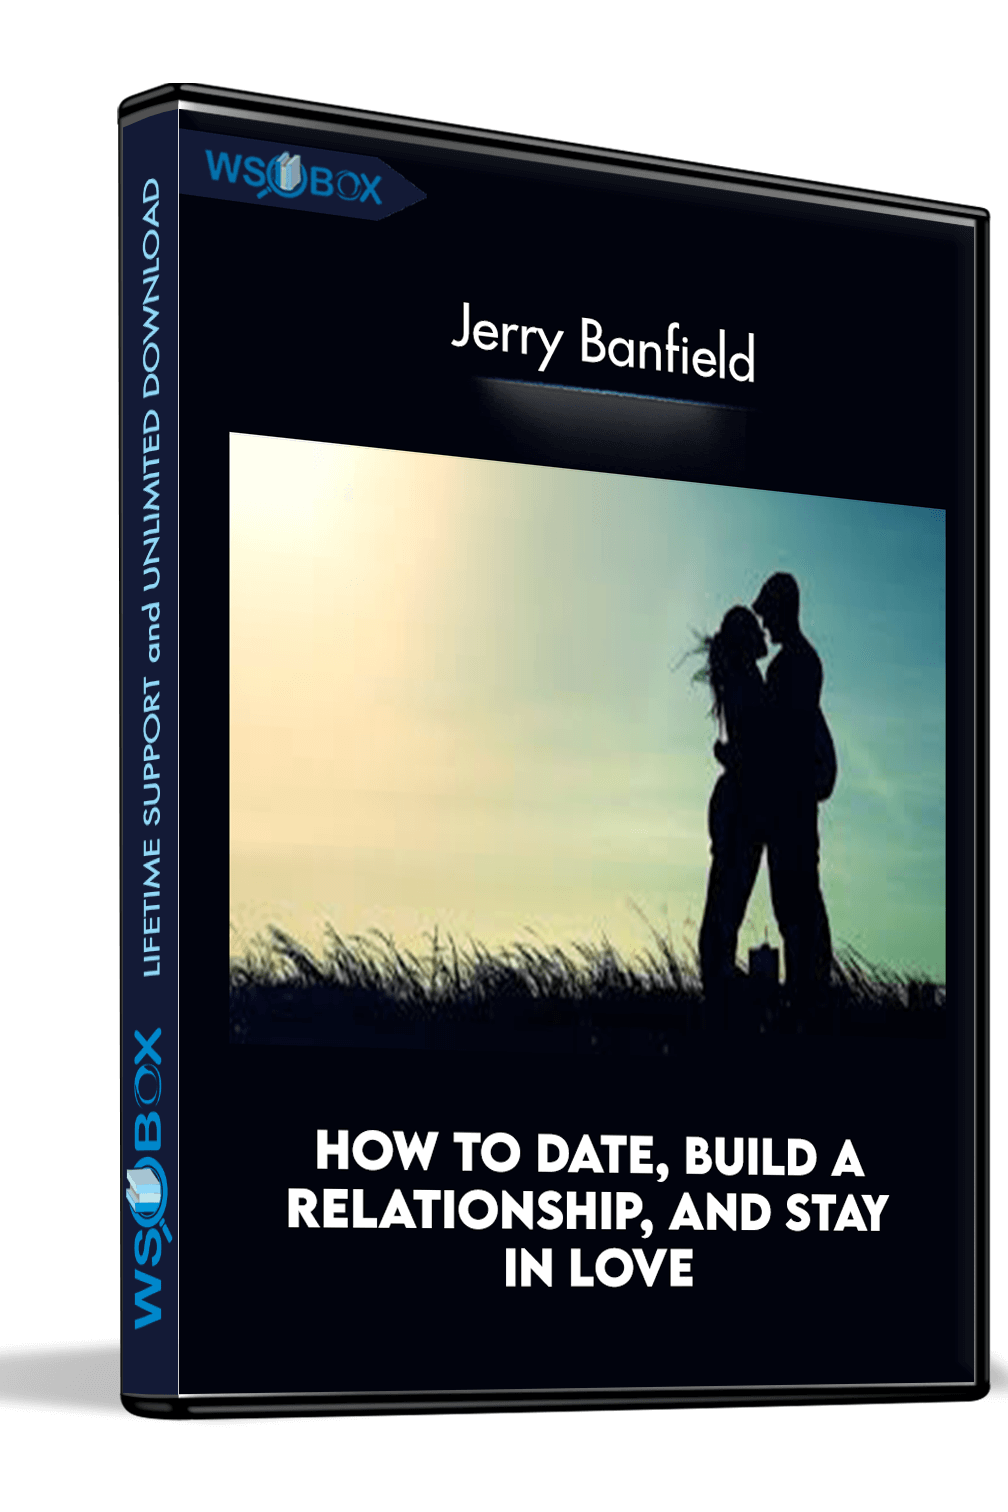 How to Date, Build a Relationship, and Stay In Love – Jerry Banfield